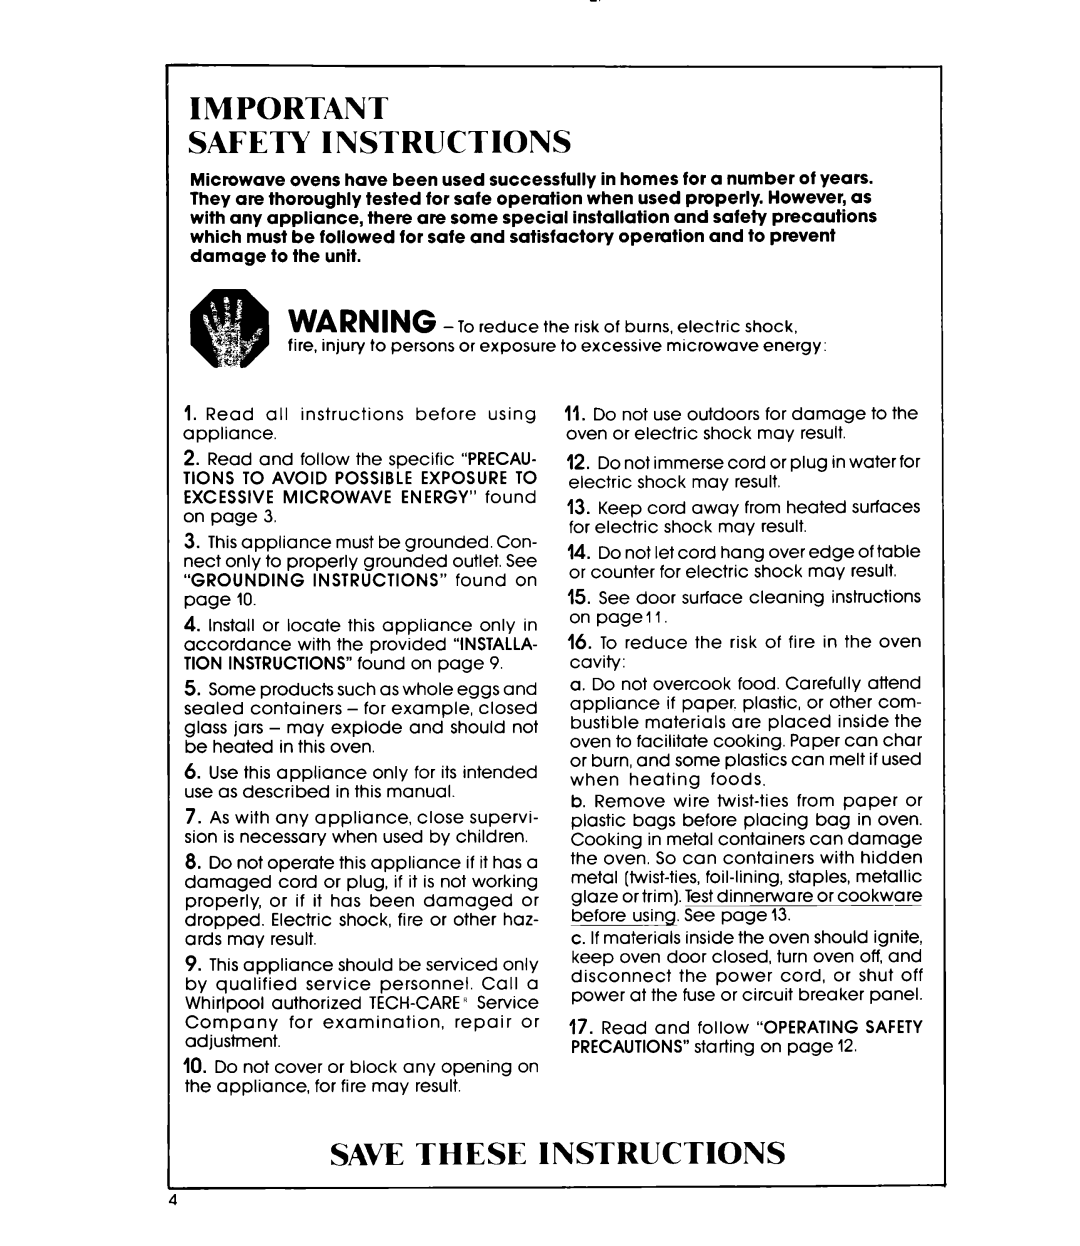 Whirlpool MW1000XP manual Safety Instructions, Save These Instructions 